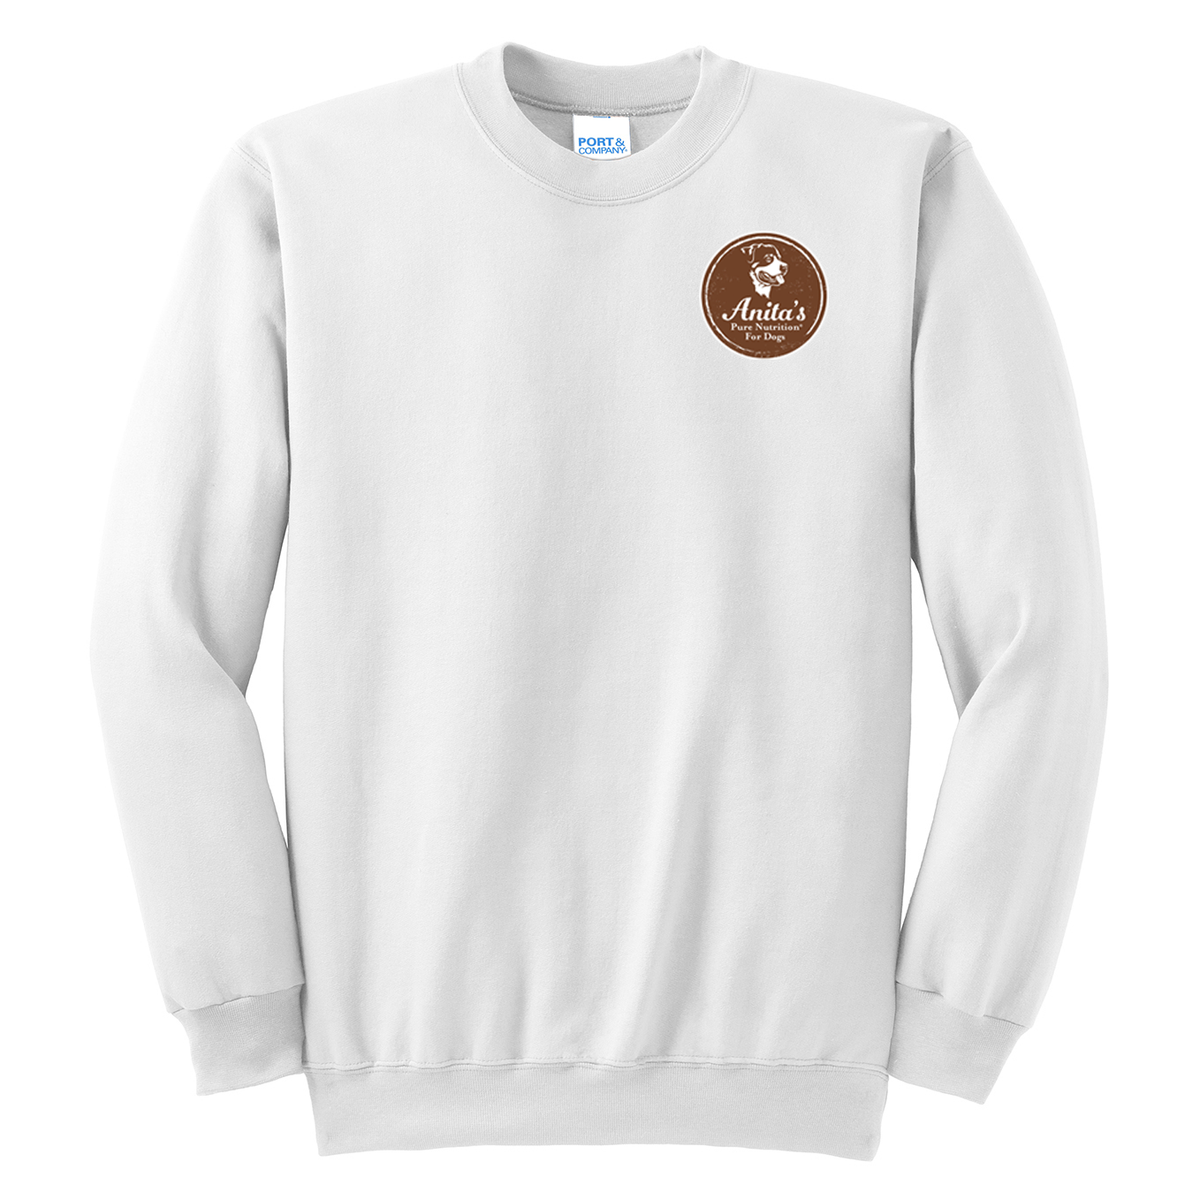 Anita's Pure Nutrition For Dogs Crew Neck Sweater